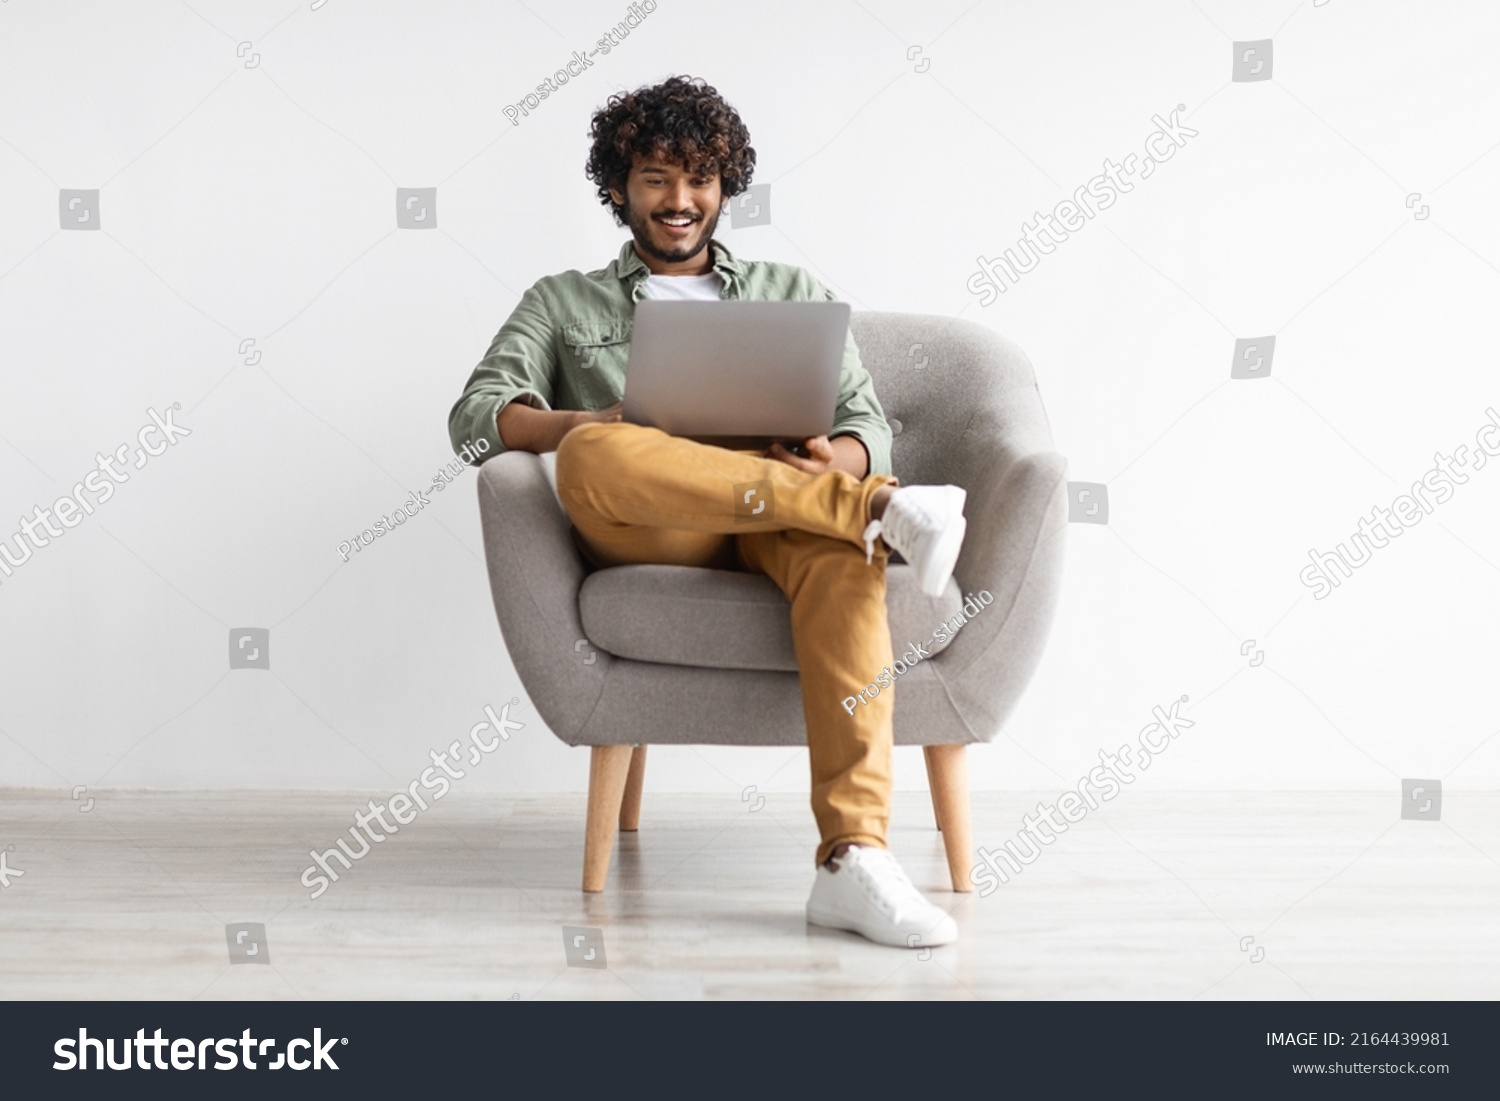 Joyful young indian guy in casual sitting in armchair, chilling with modern laptop, gambling or gaming online, surfing on Internet, white studio background, full length shot, copy space #2164439981